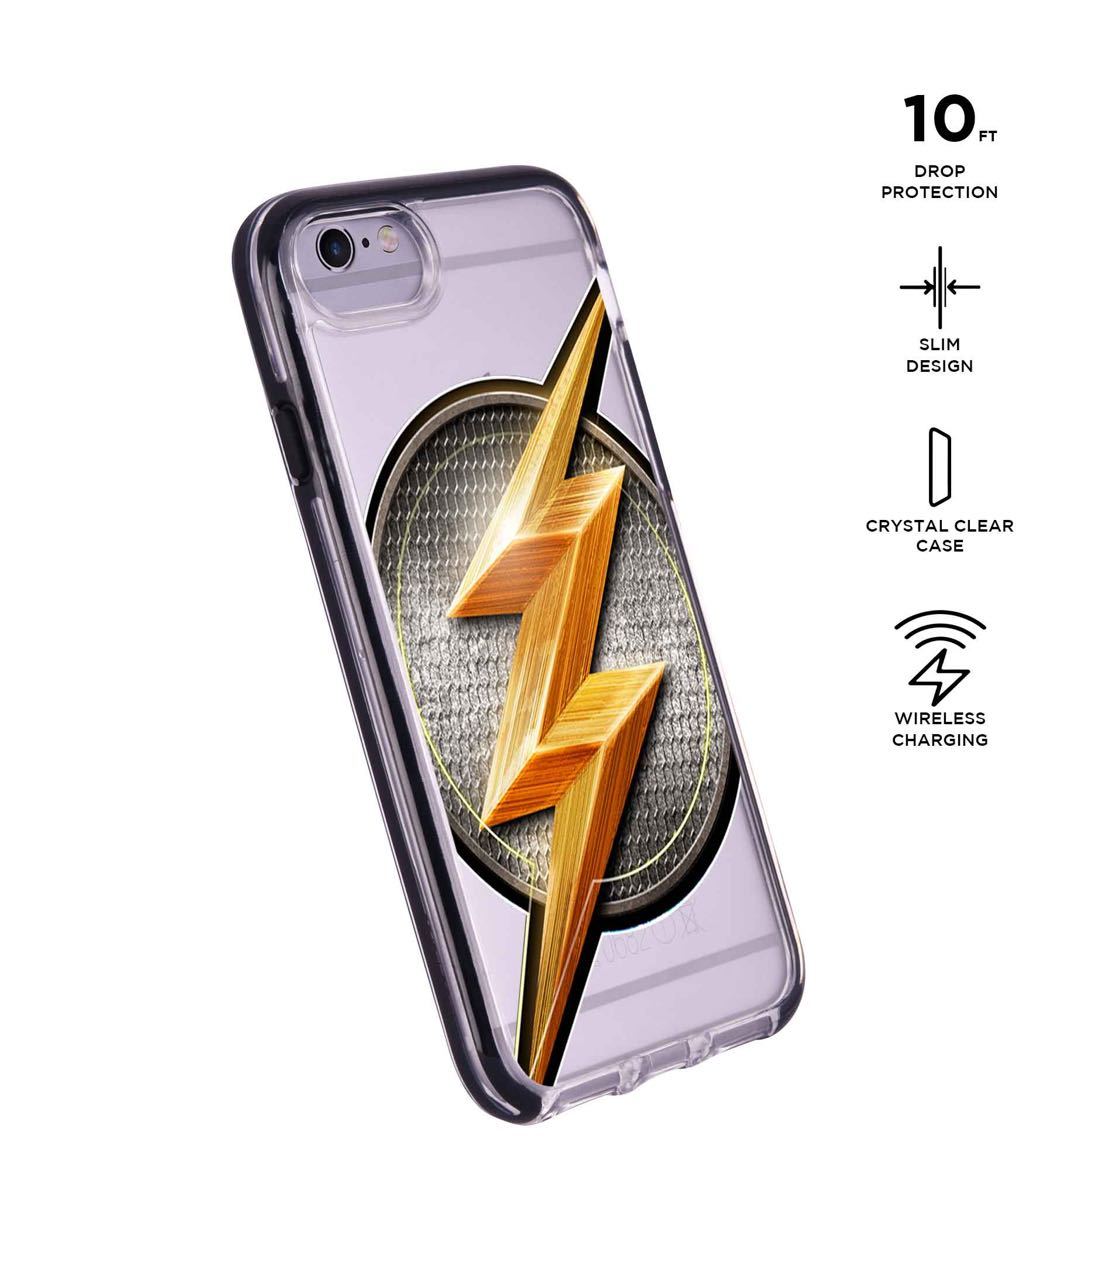 Flash Storm - Extreme Phone Case for iPhone 6 Plus